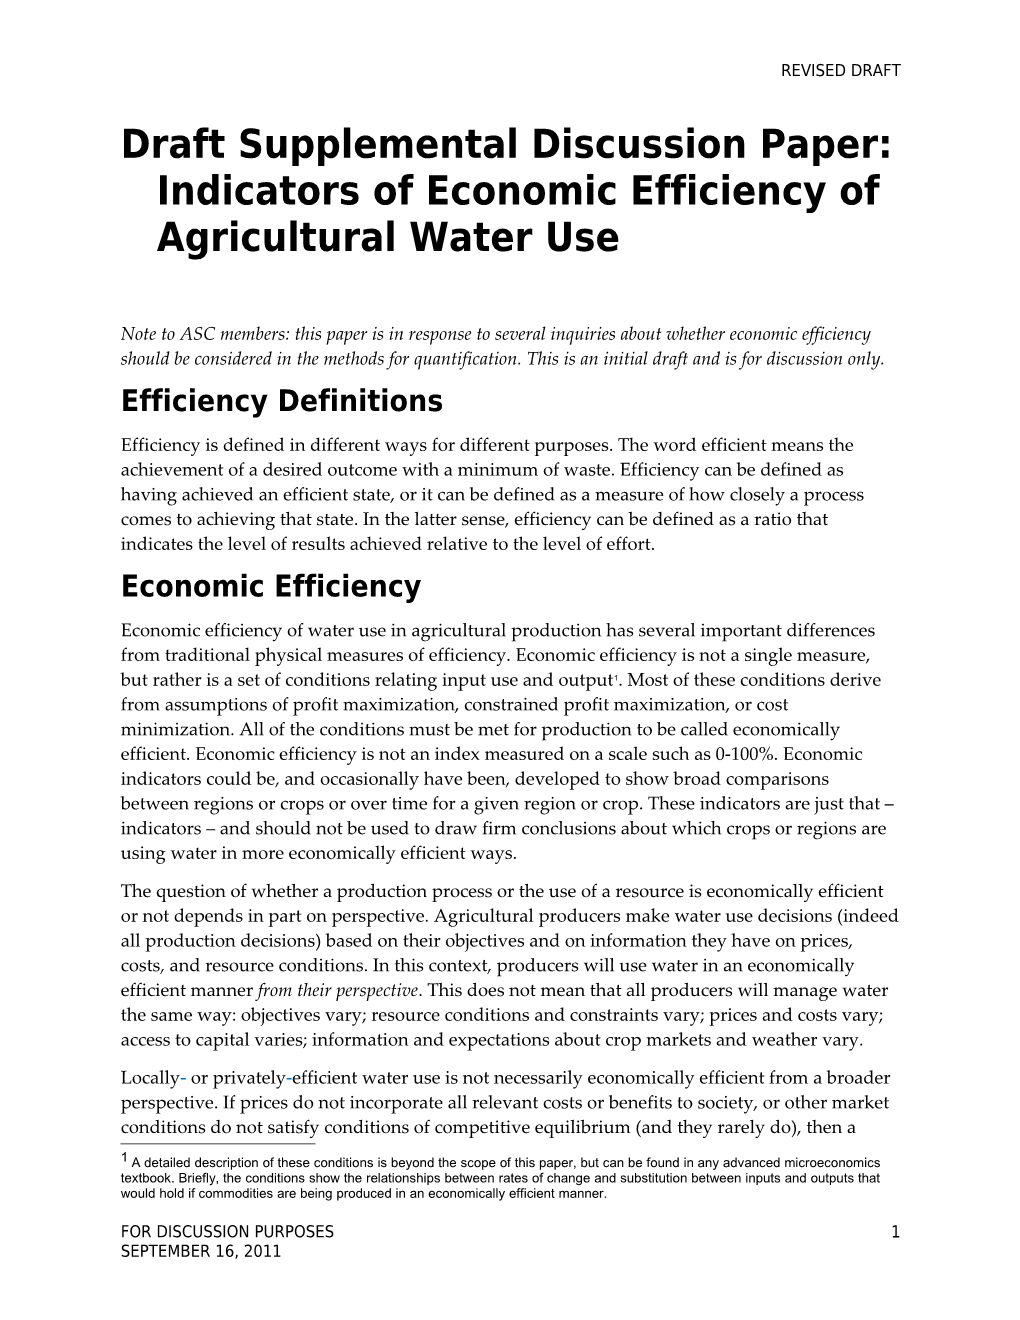 Draft Supplemental Discussion Paper: Indicators of Economic Efficiency of Agricultural Water Use